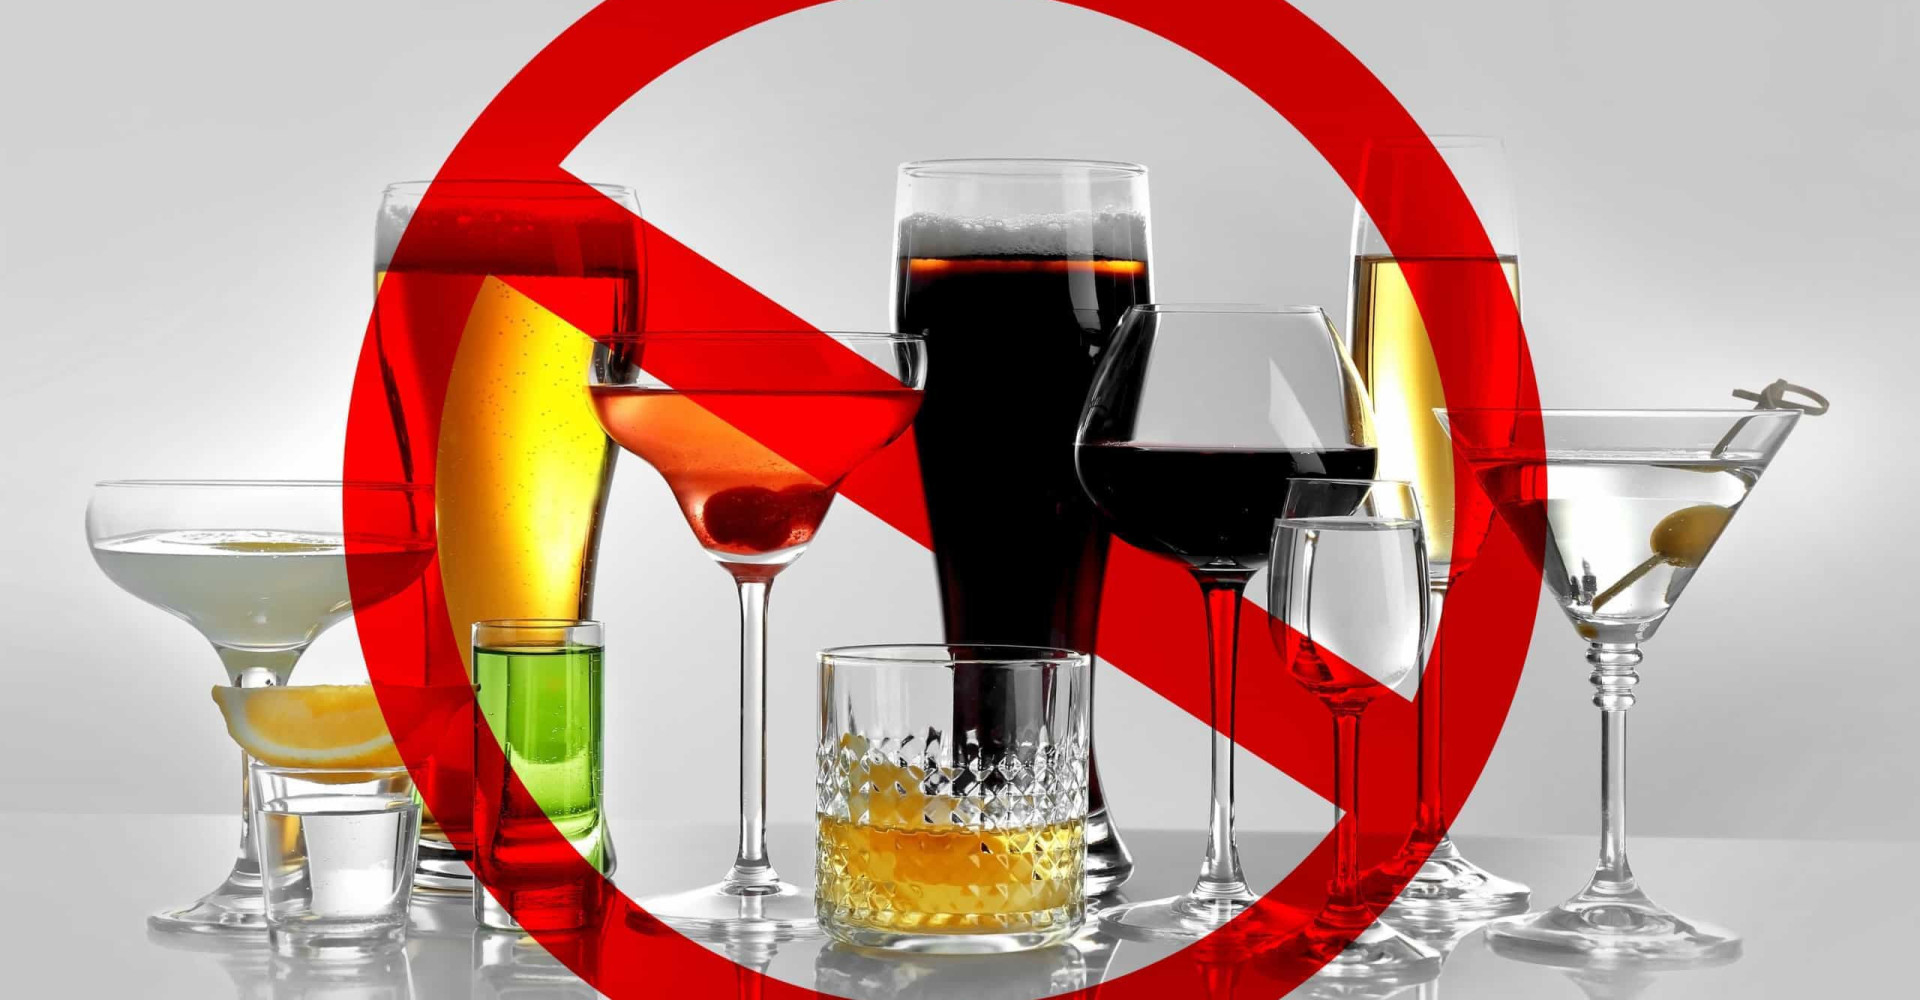 Alcohol is banned or restricted in these countries